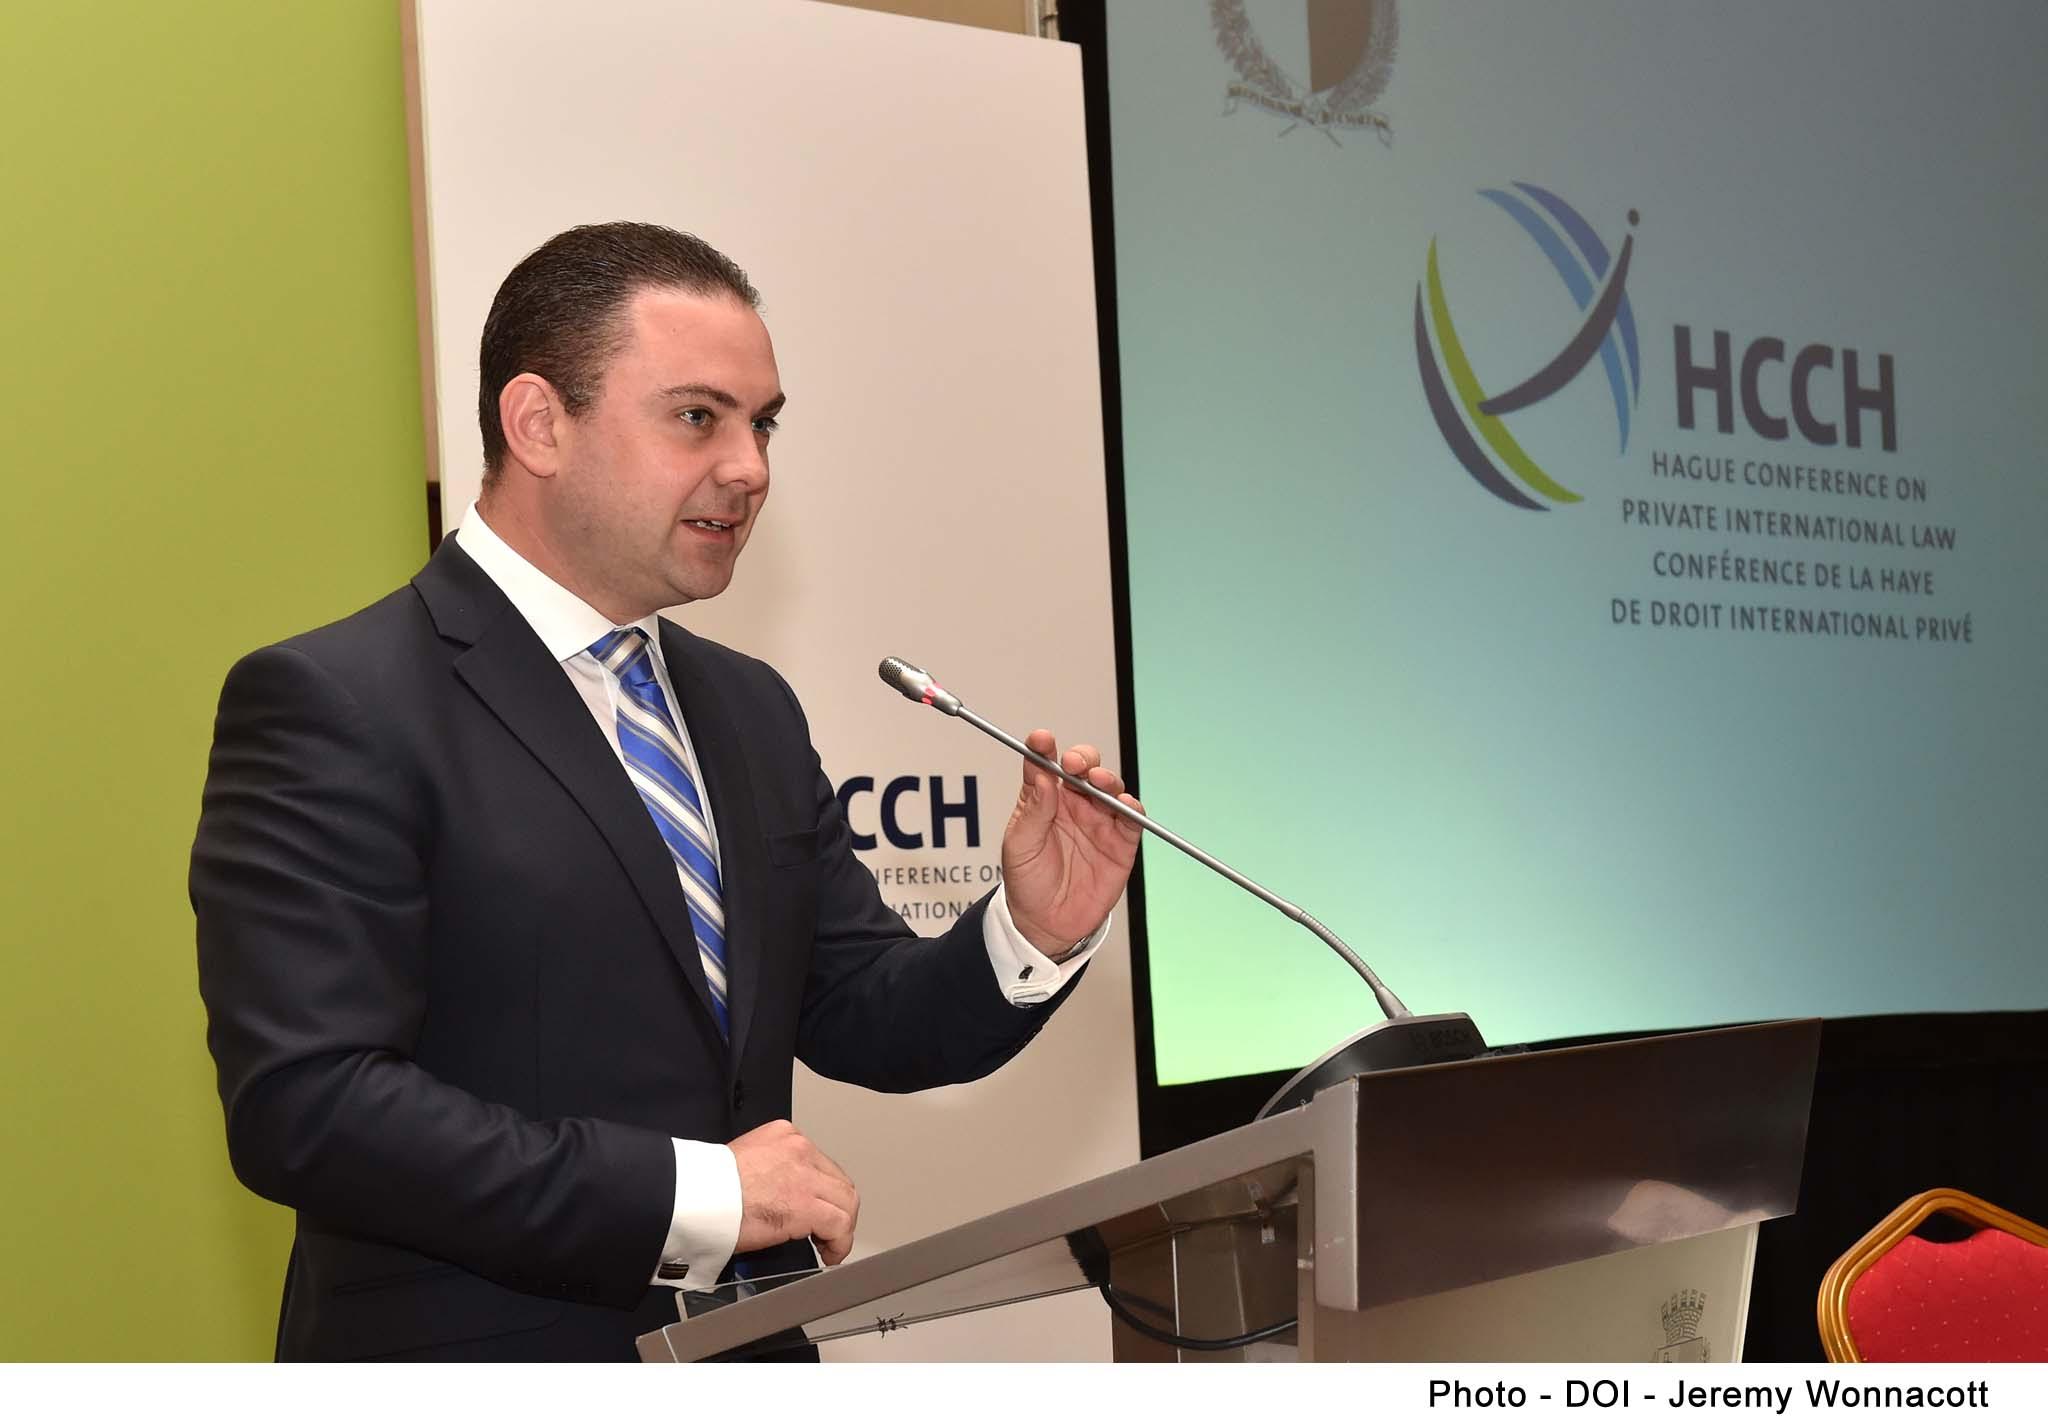 Minister for the Family and Social Solidarity Michael Farrugia & Minister for Justice, Culture and Local Government Owen Bonnici address the opening session of ‘The 4th Malta Conference on Cross Frontier Child Protection & Family Law’Grand Hotel Excelsior, Floriana